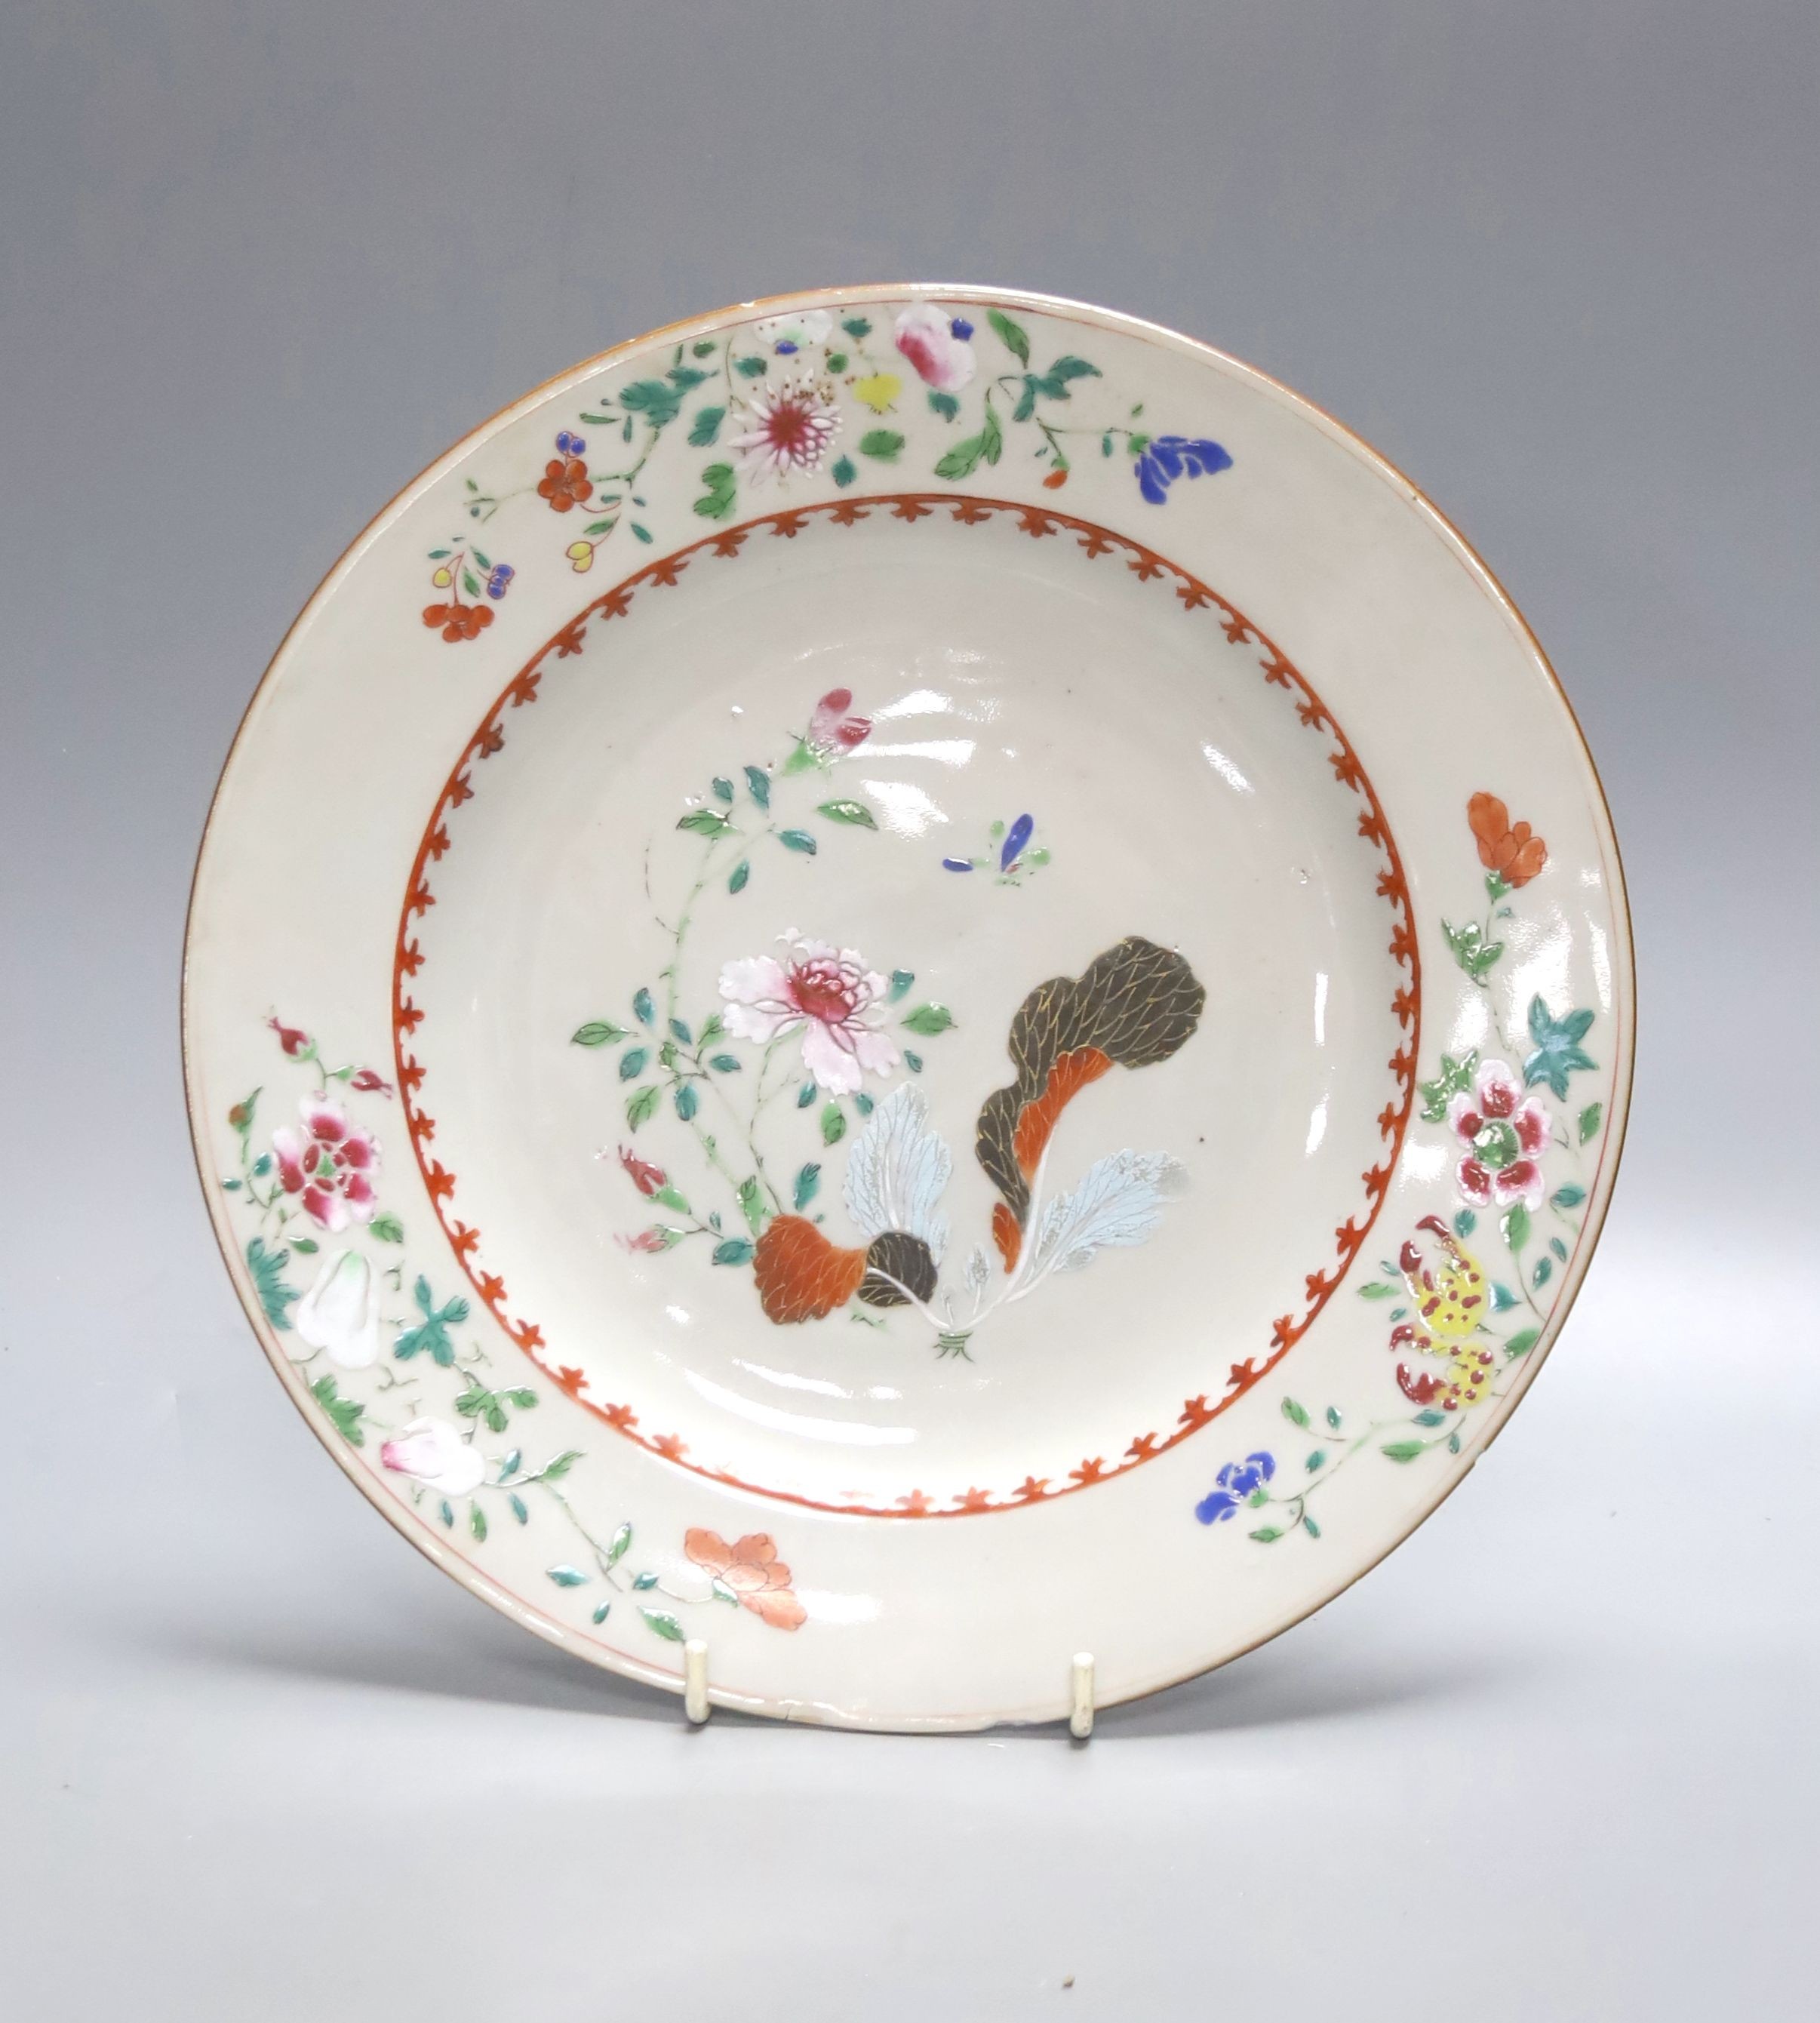 An 18th century Chinese export porcelain ‘tobacco leaf’ plate, painted in famille rose enamels, 27cm